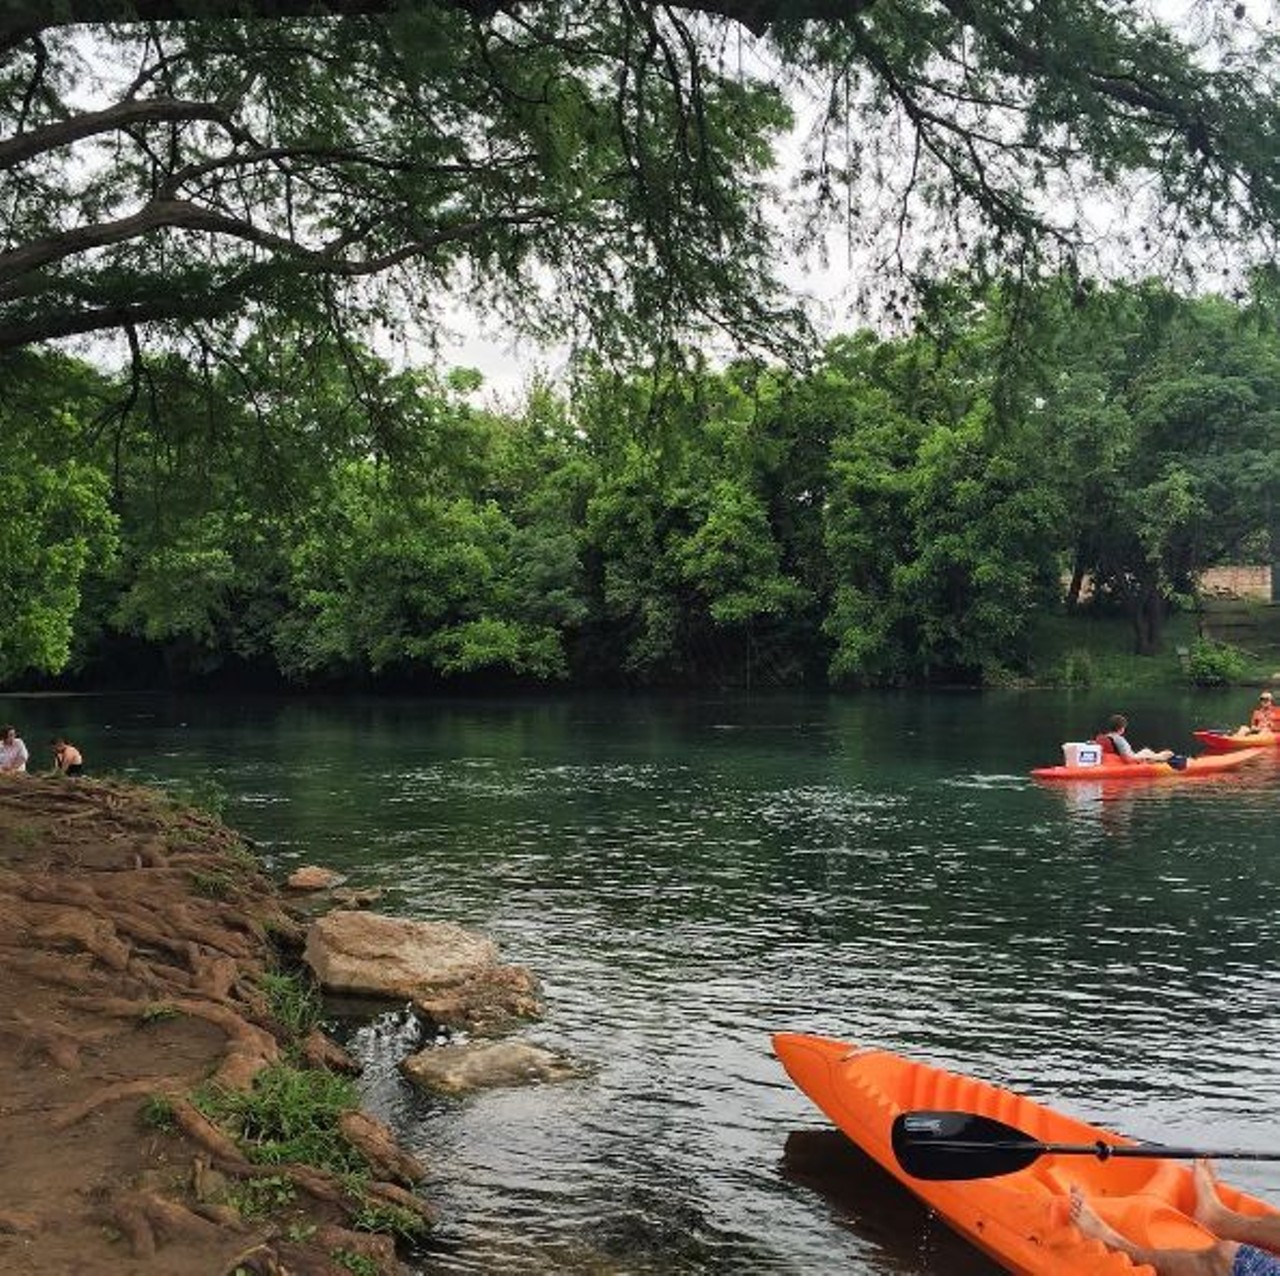 Rio Vista Park
555 Cheatham St, San Marcos, (512) 393-8400
Spend a day on the water and practice your kayaking skills.
Photo via Instagram, miss_yvette_rod